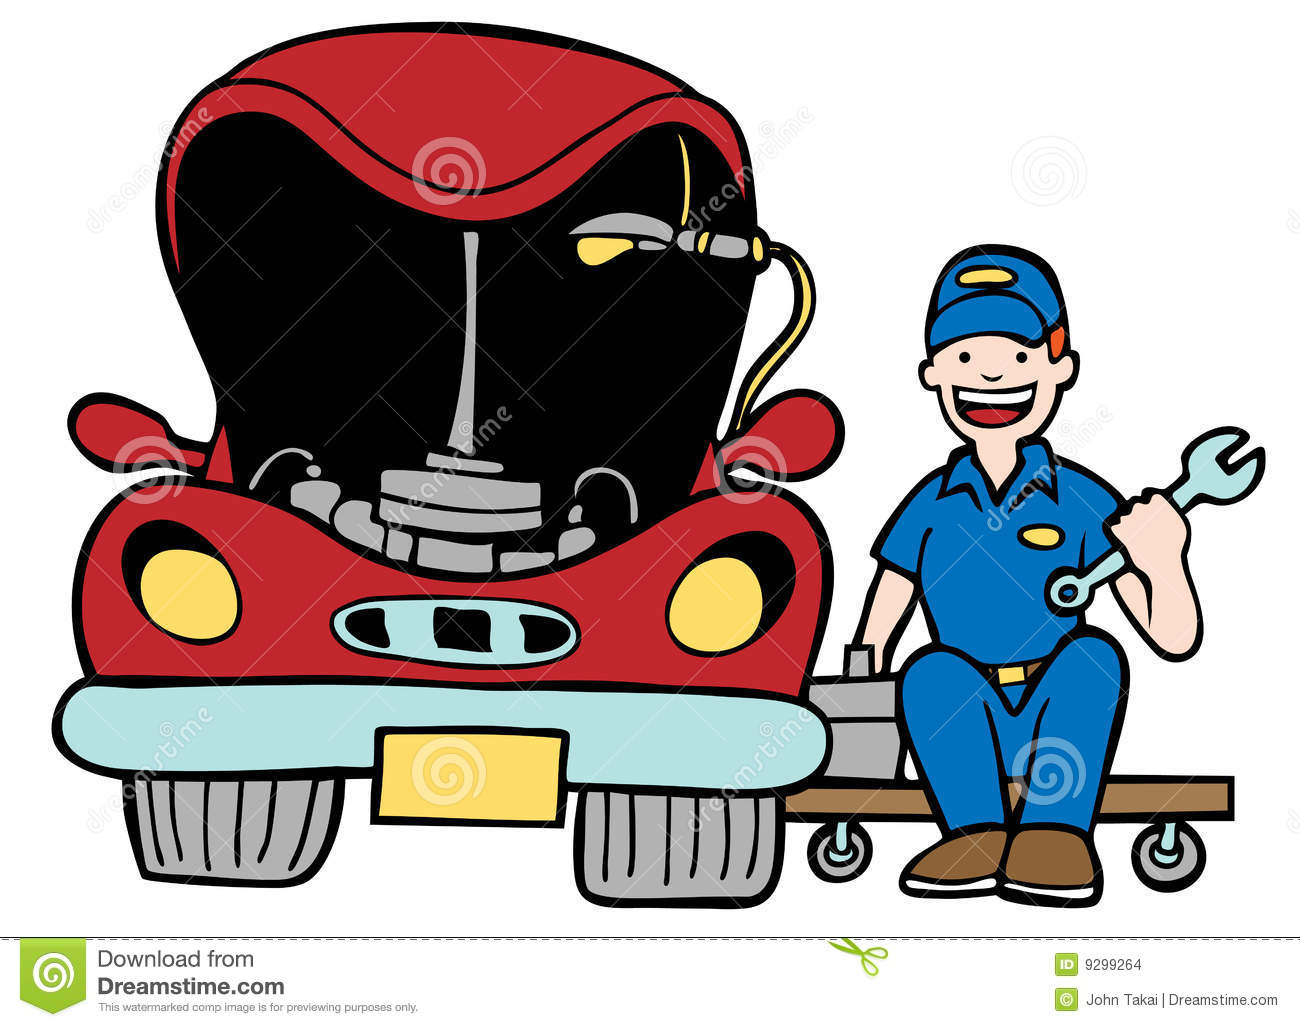 auto repair - the red car in 